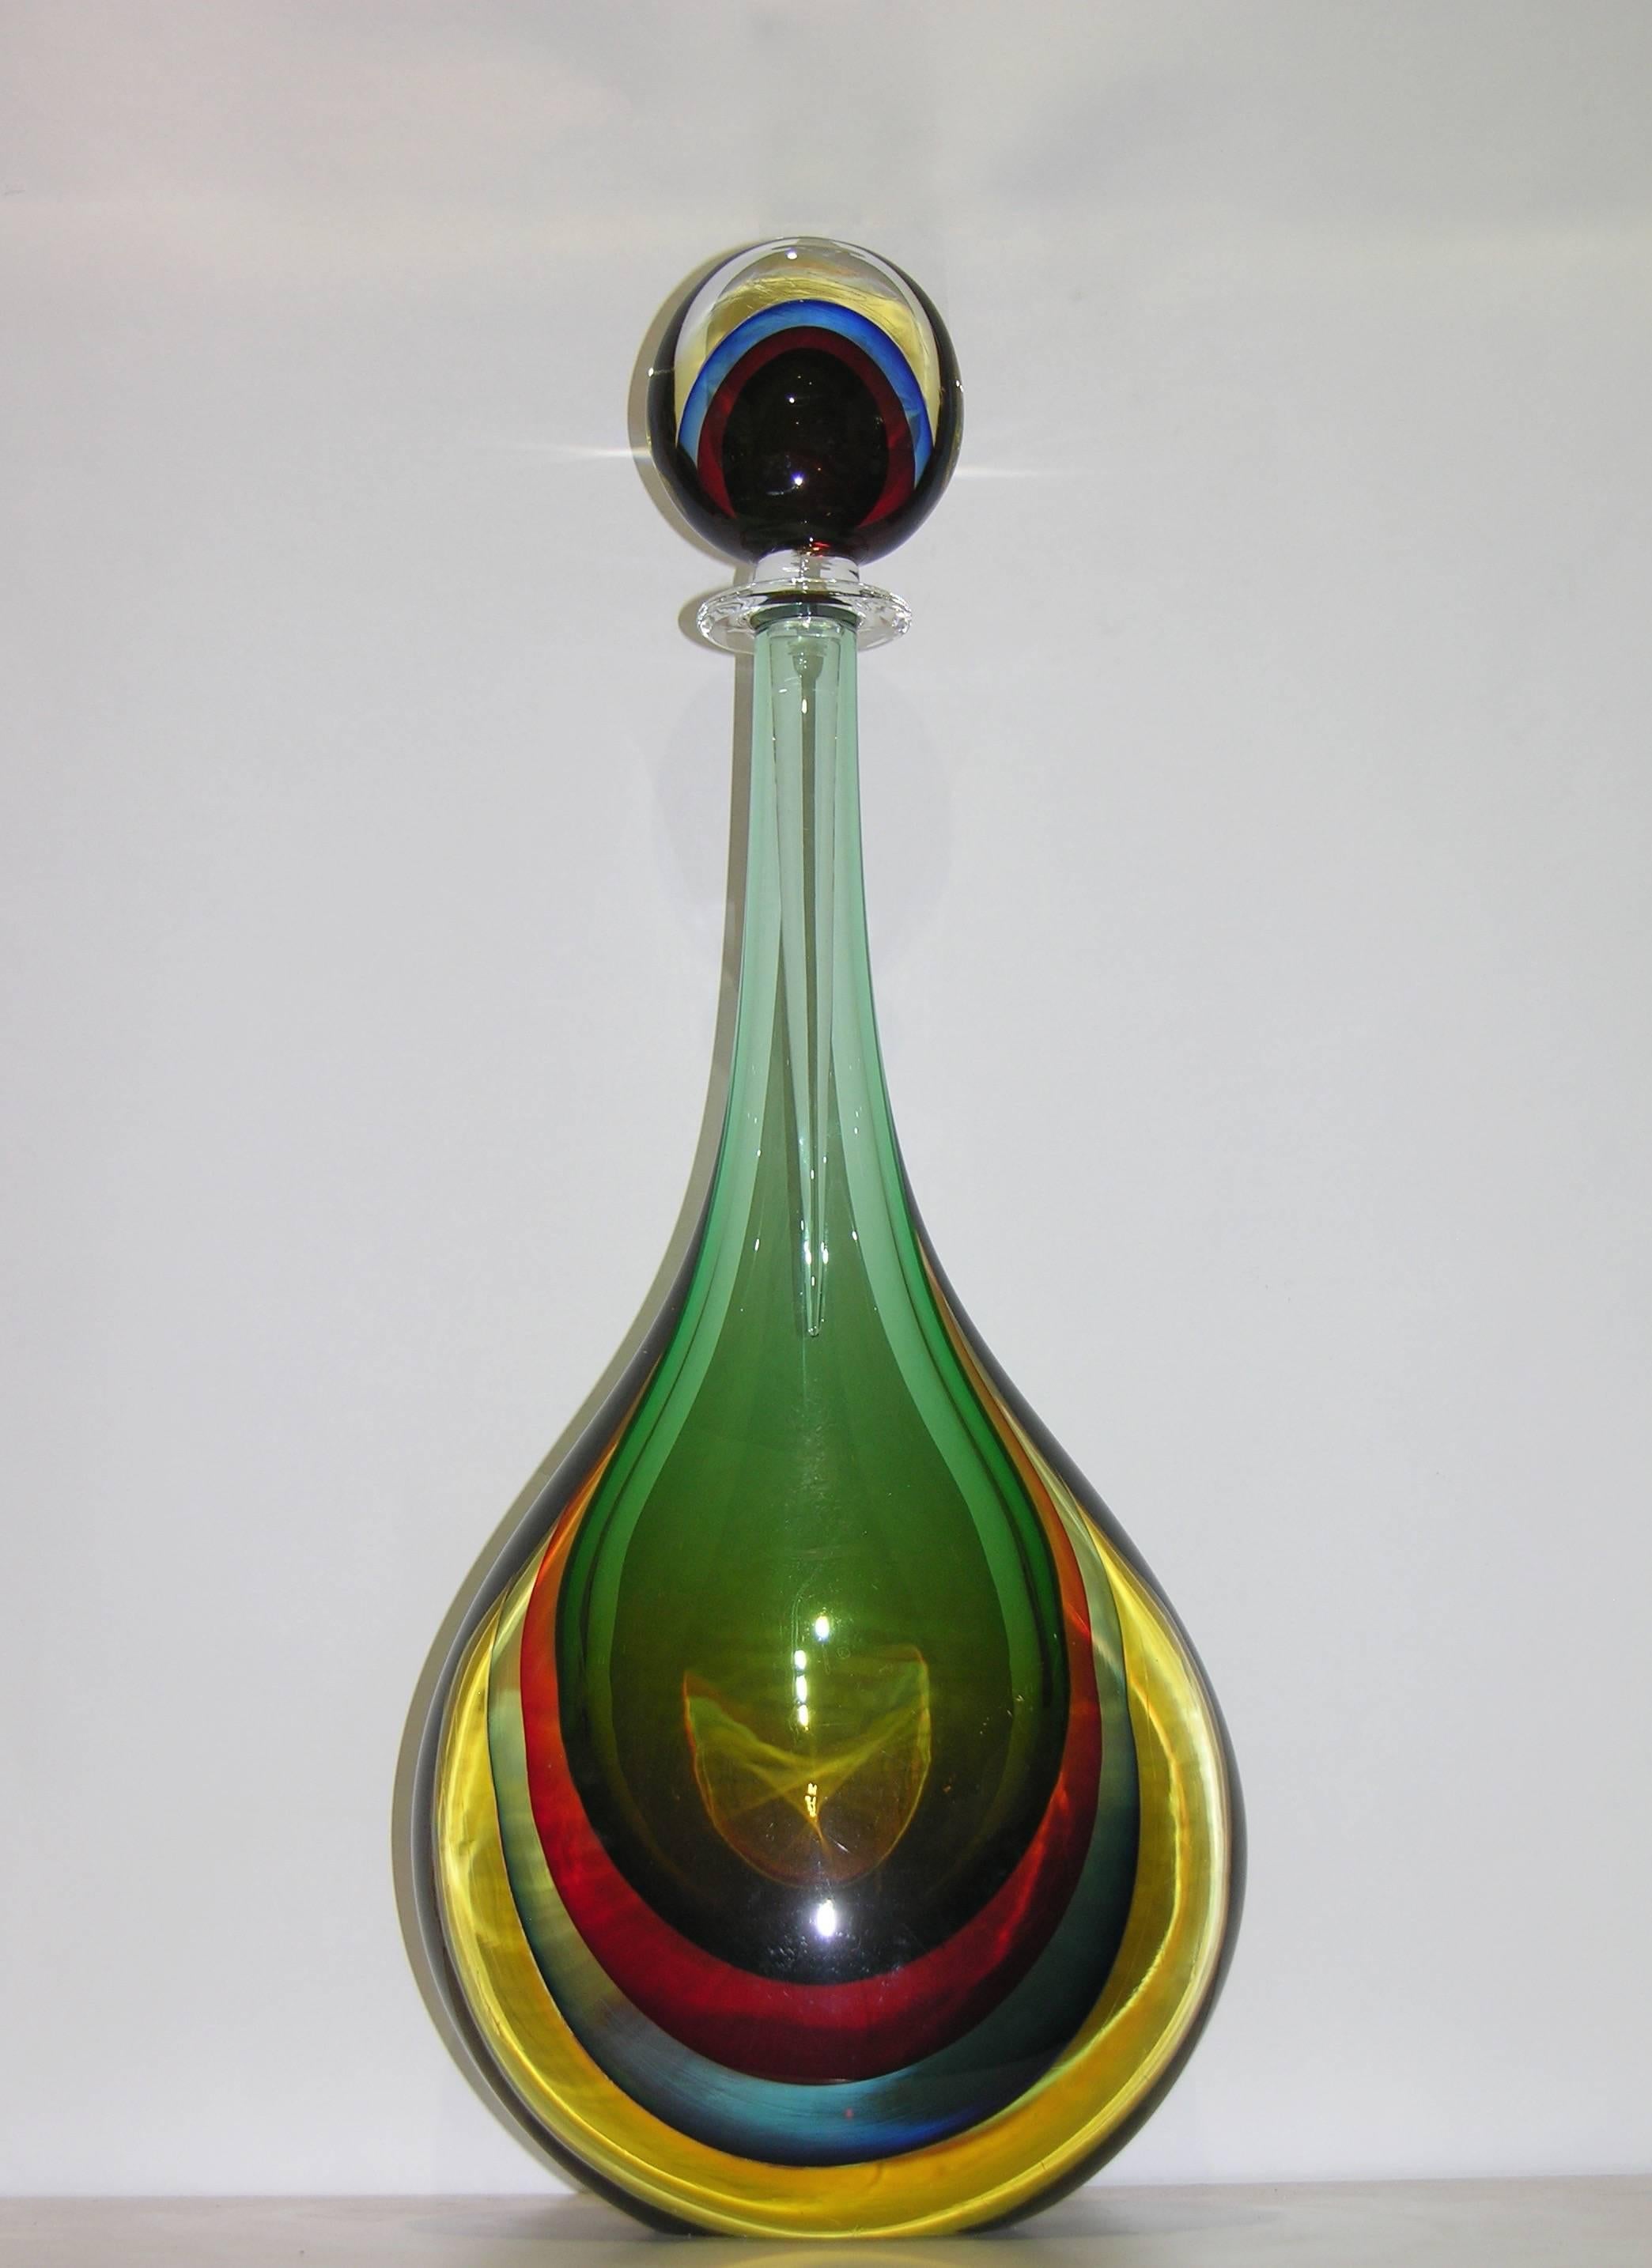 A rare pair of large sized bottles with drop stoppers in Murano glass by Formia, beautiful and sophisticated decoration with the Sommerso technique, the green body encased in the lower part with three colored layers, red, blue and yellow. The fact